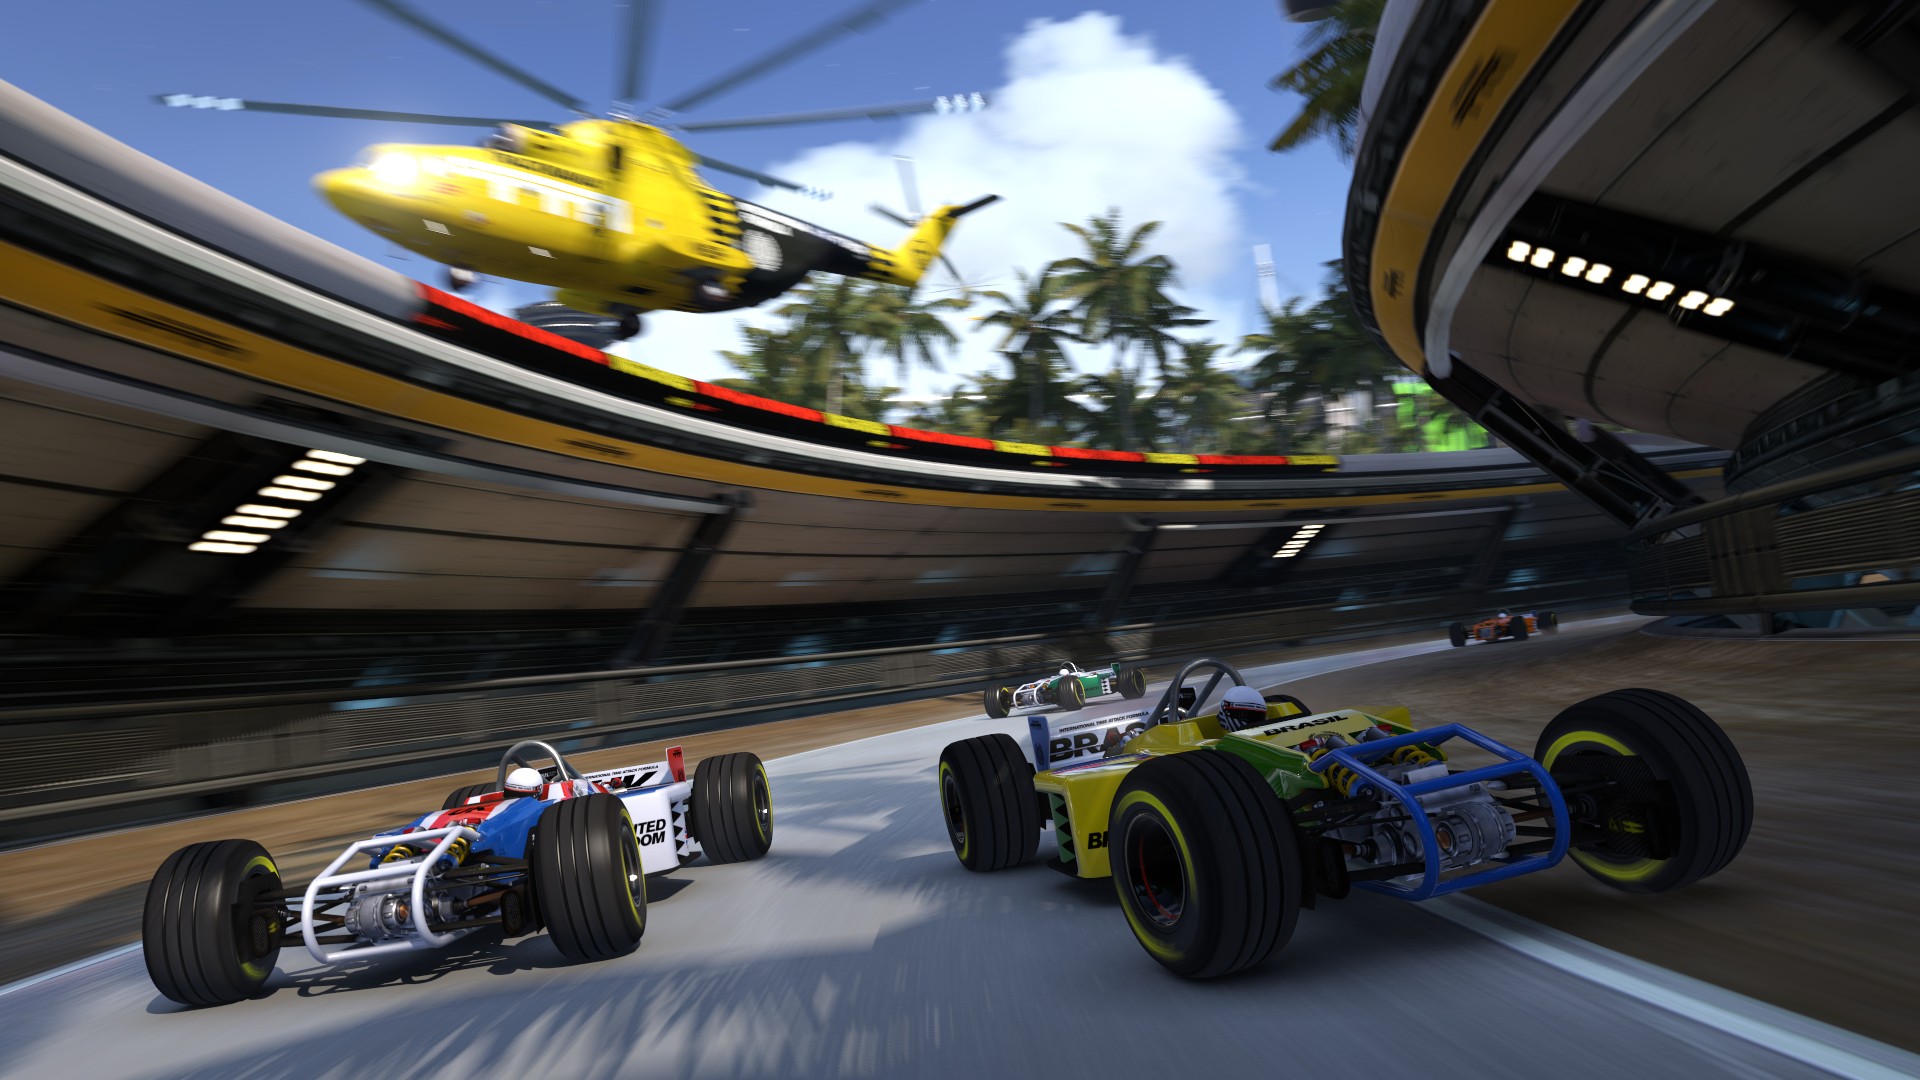 HQ TrackMania Turbo Wallpapers | File 346.29Kb